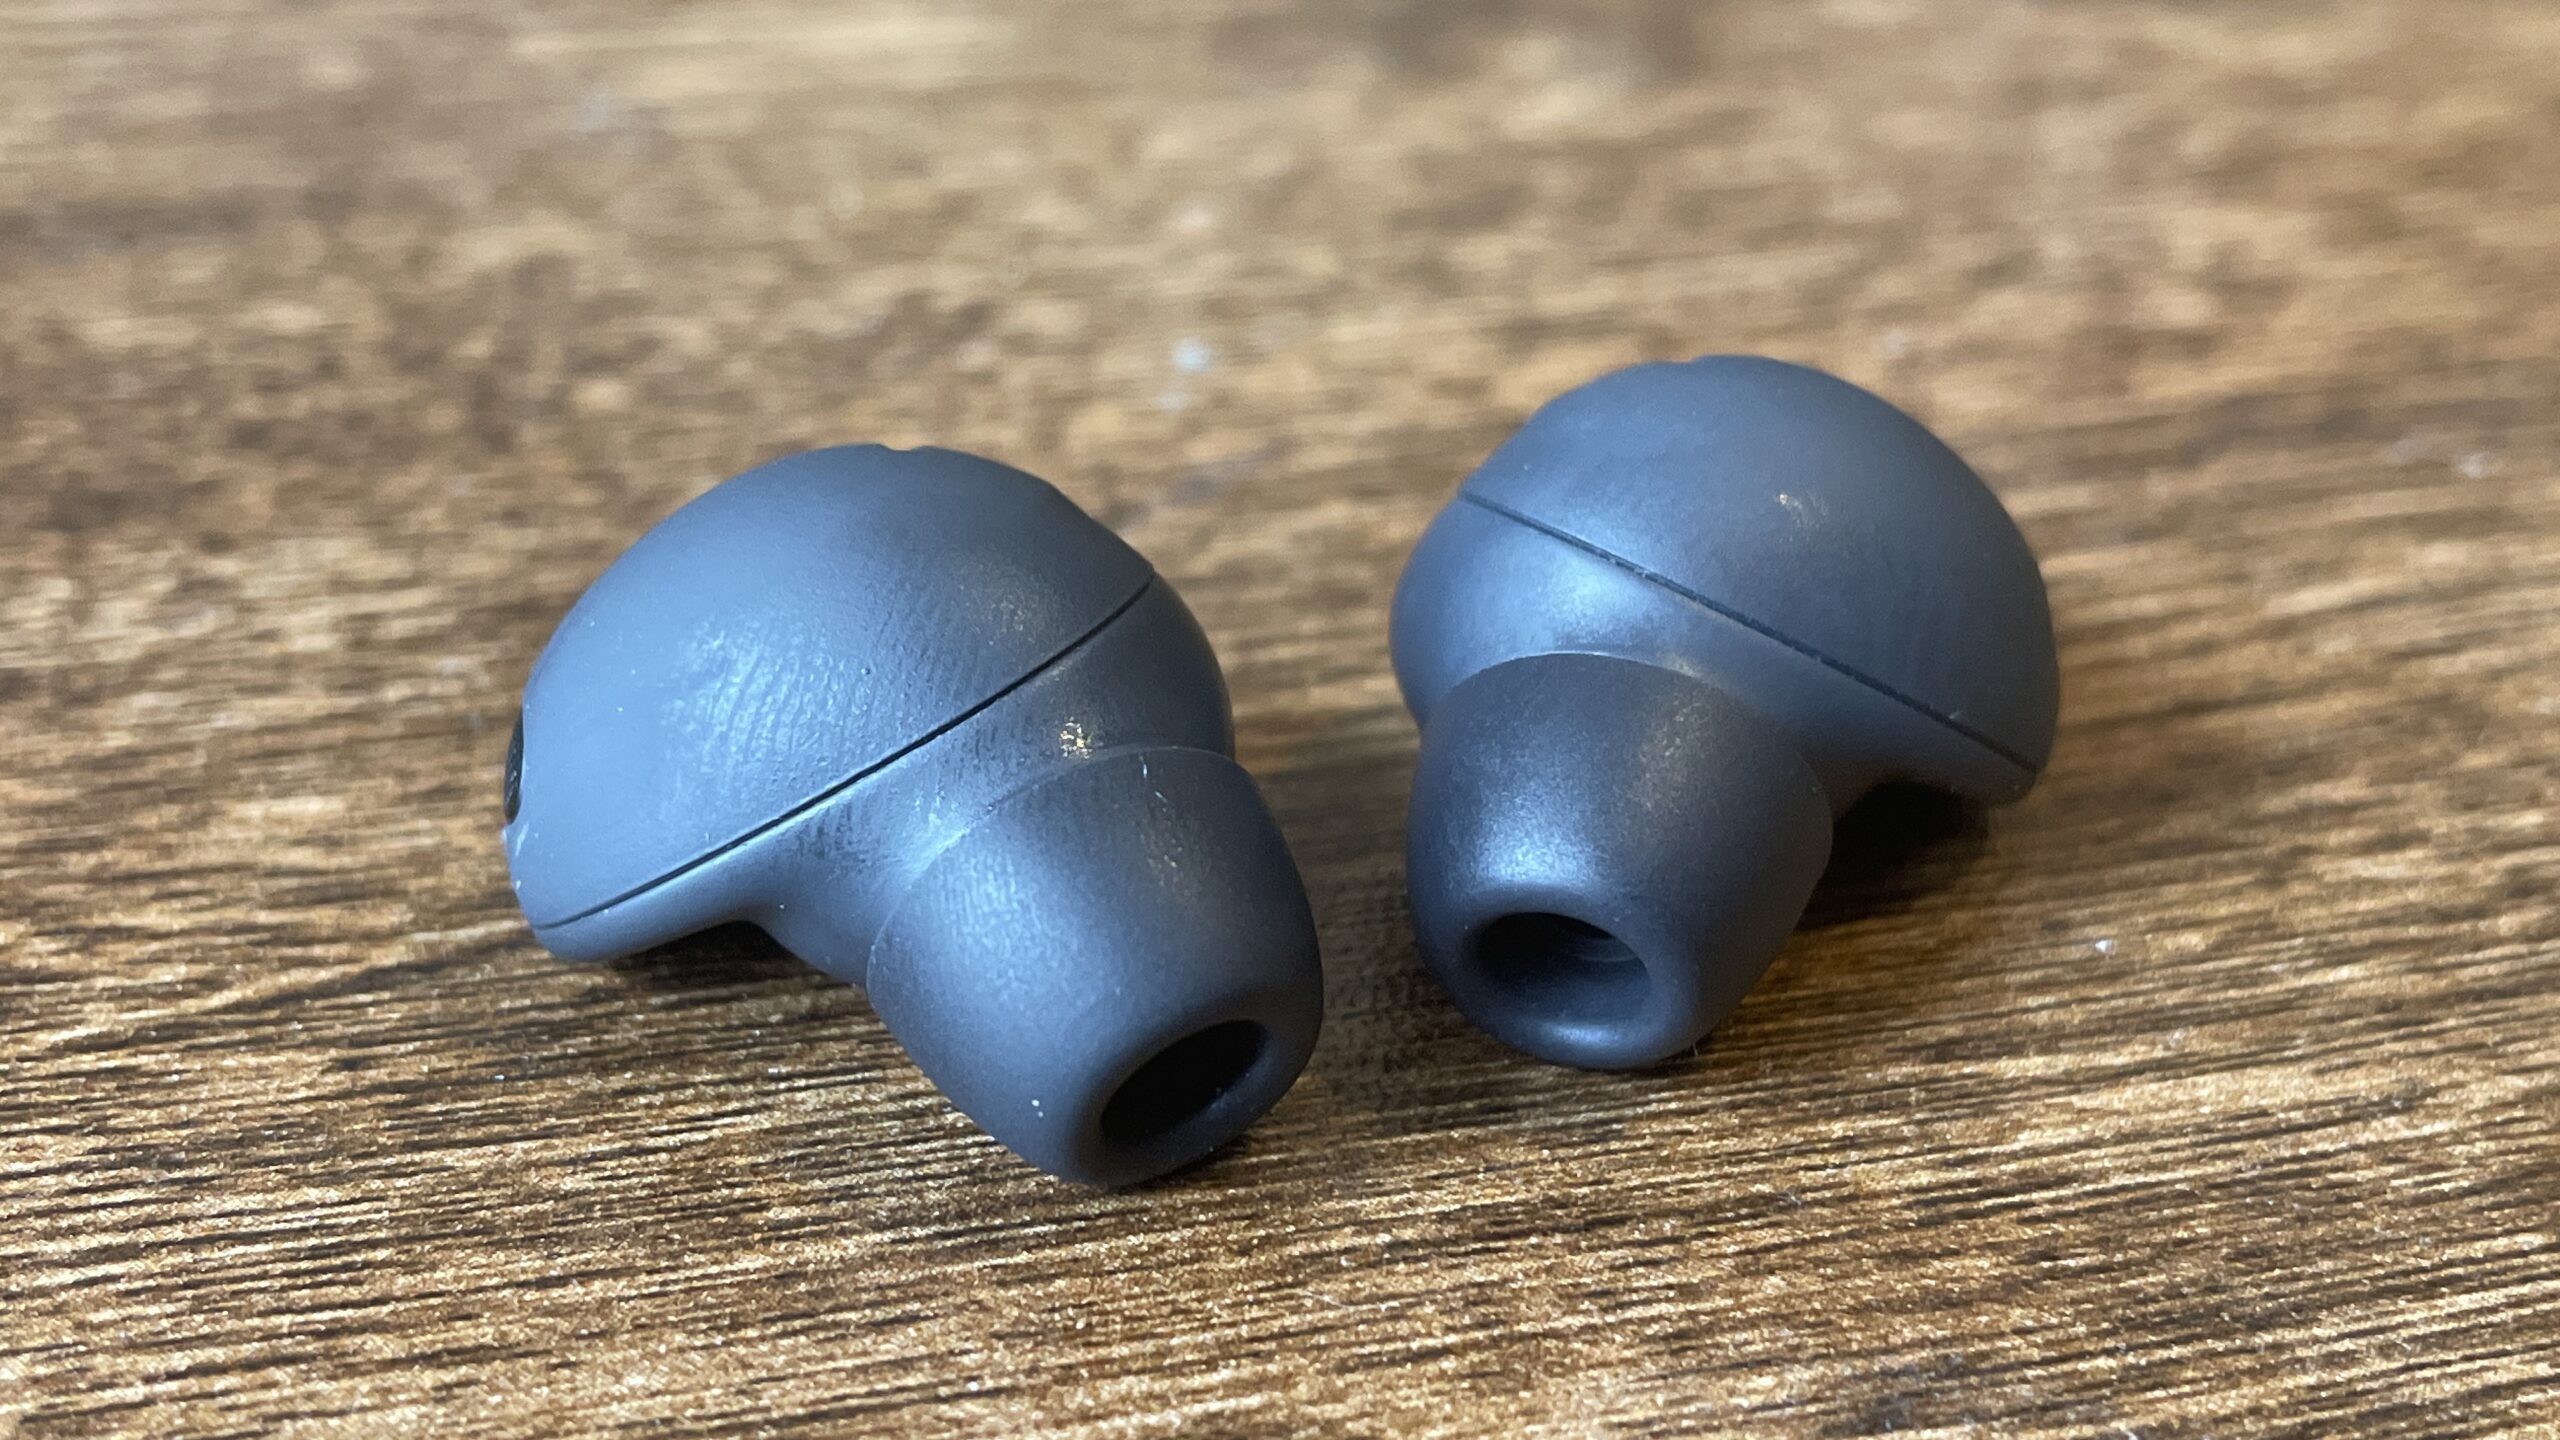 Samsung Galaxy Buds 2 Pro review: Better noise canceling than